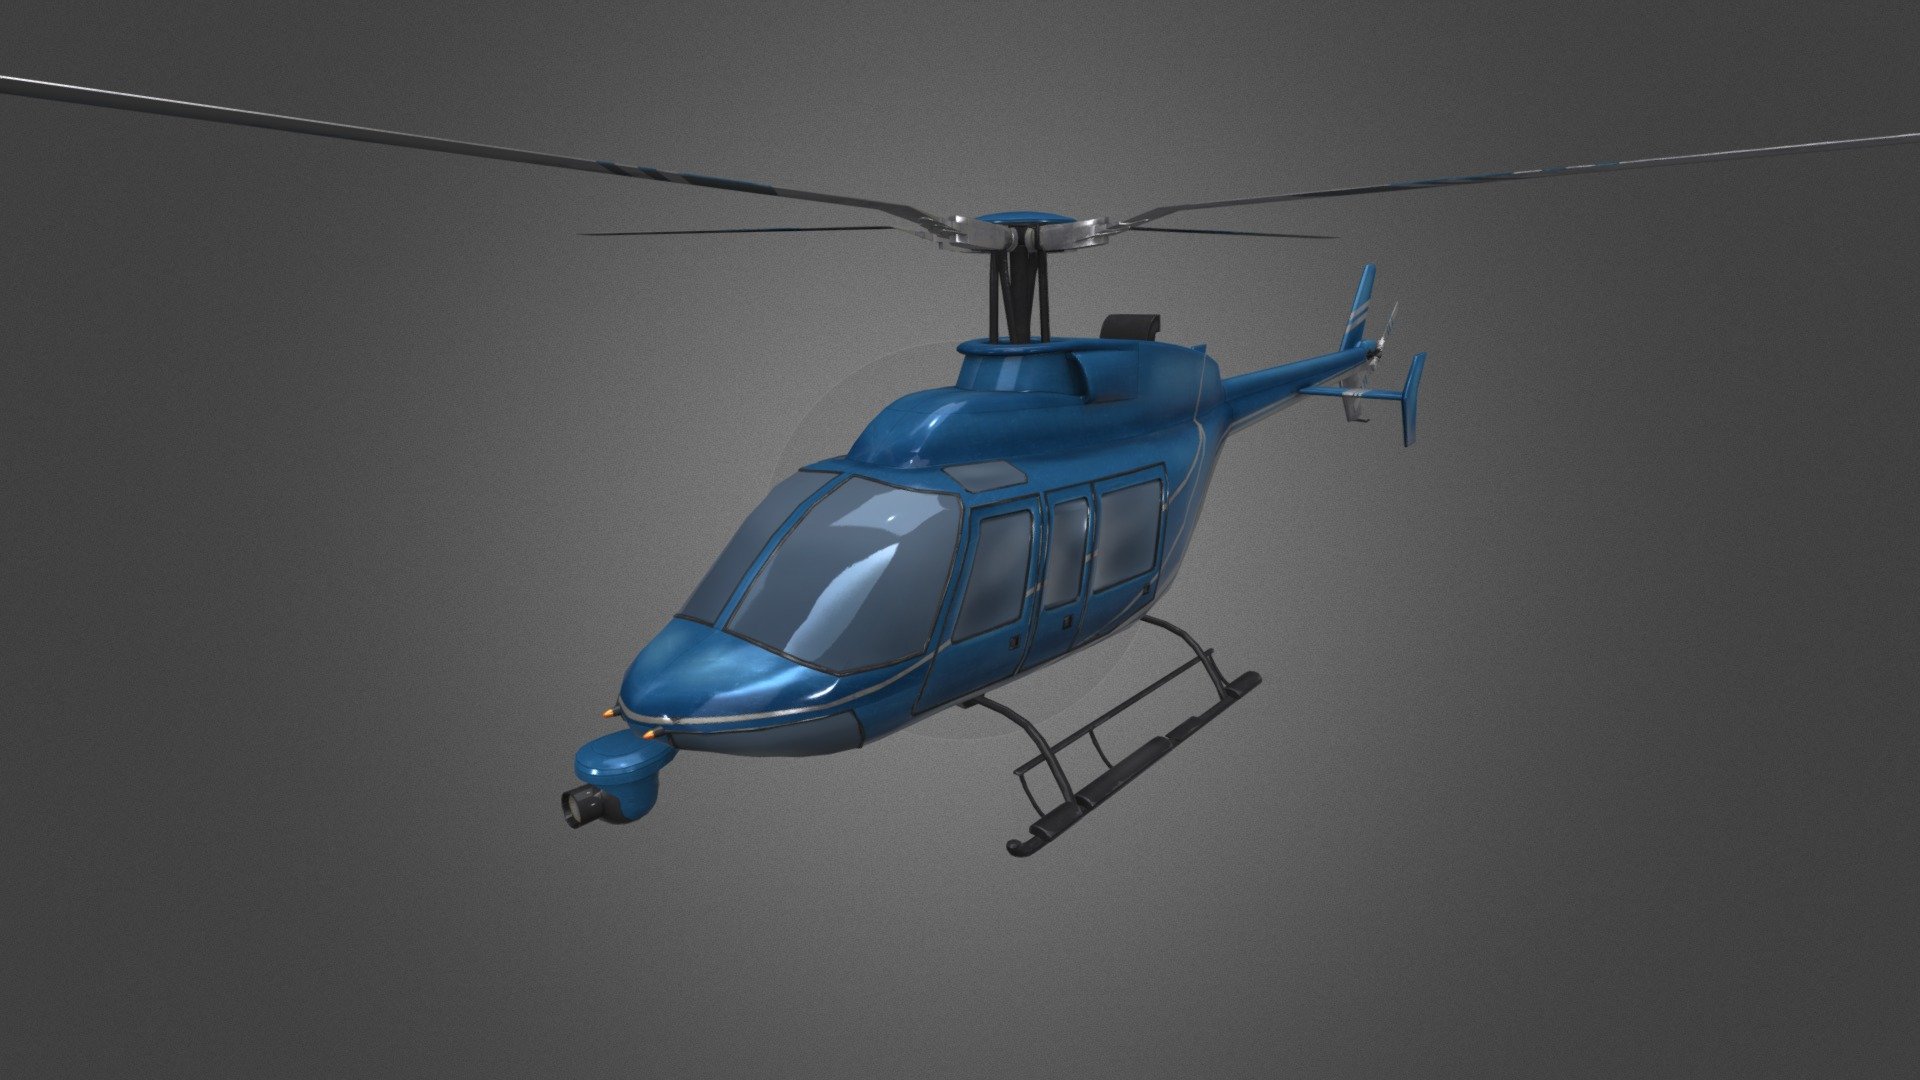 Low poly game-ready highquality and accurate 3d model of the Helicopter Bell 407Jetranger

Download: http://gamedev.cgduck.pro - Helicopter Bell 407 Jet Ranger - 3D model by CG Duck (@cg_duck) 3d model